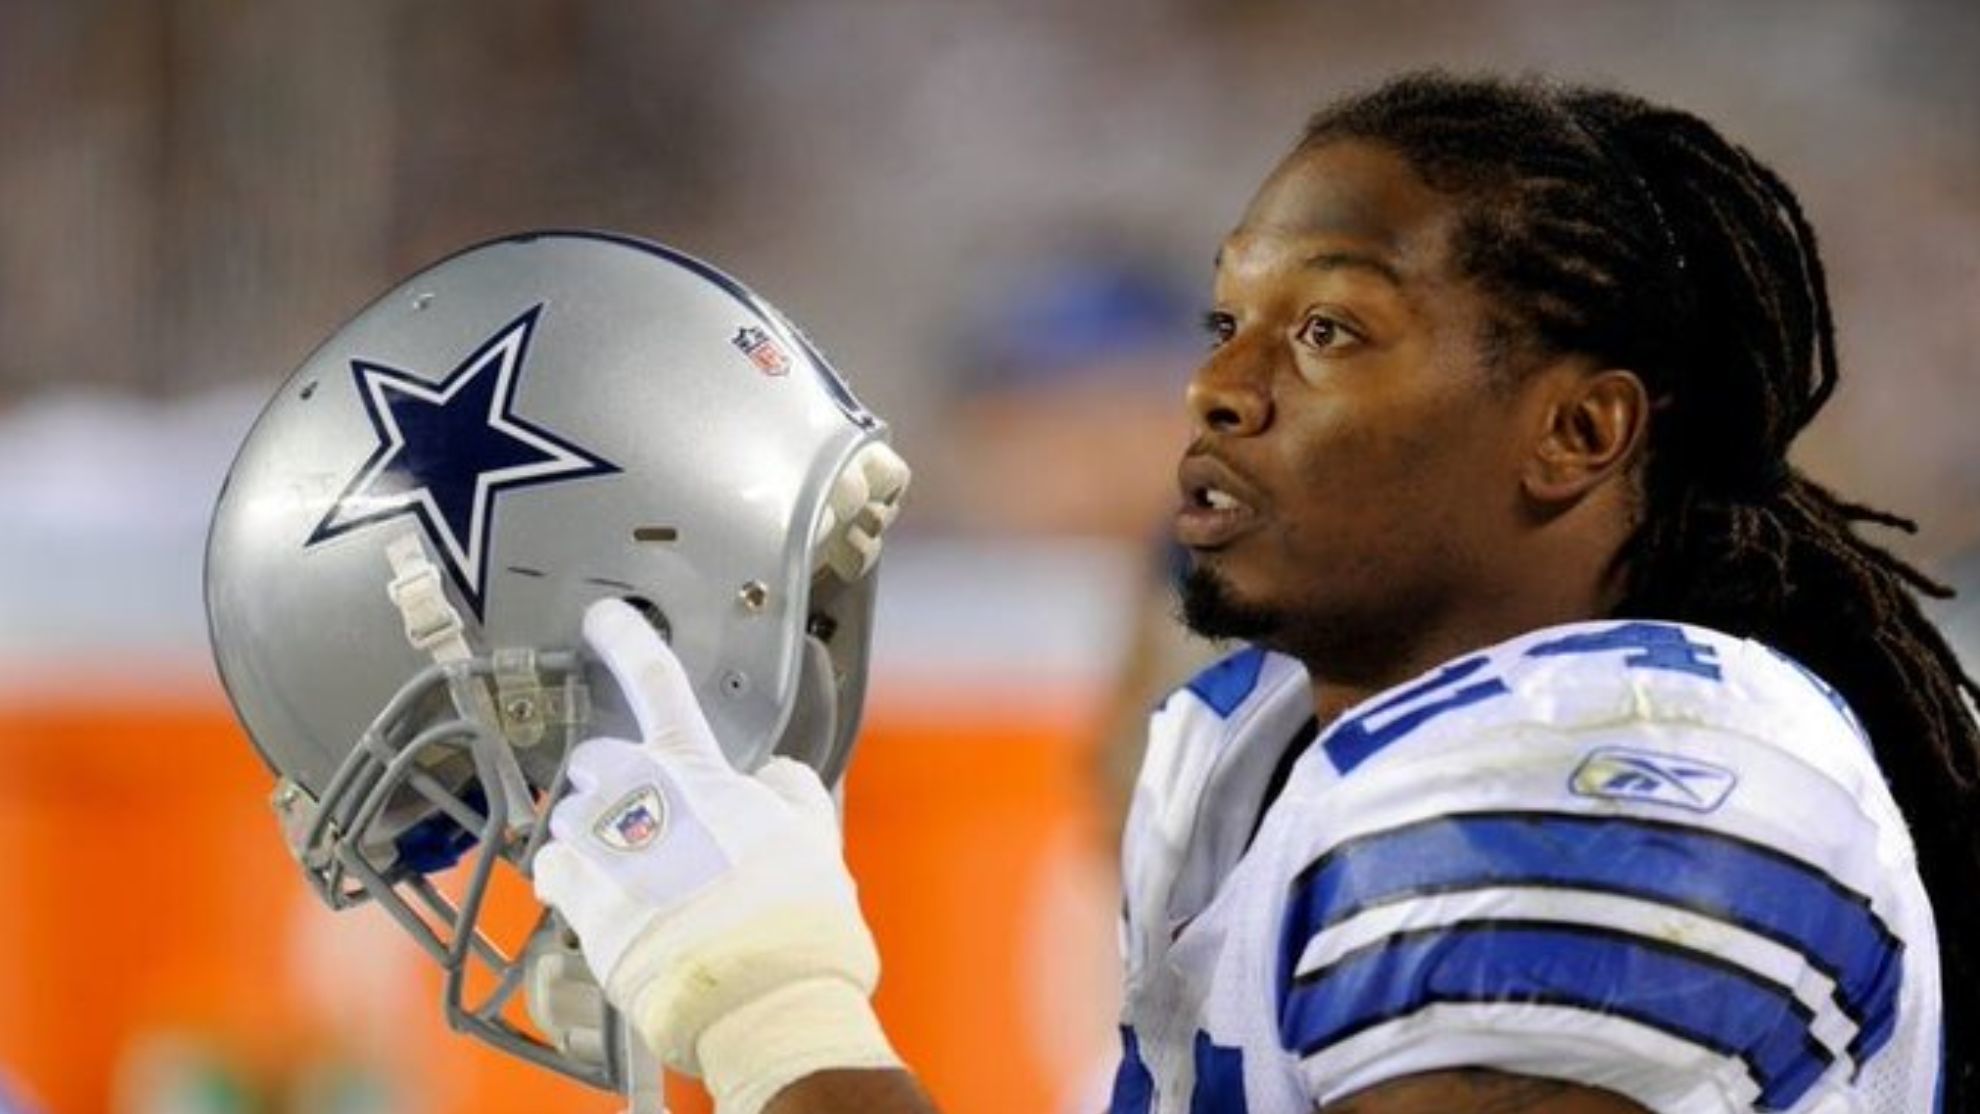 Marion Barber III cause of death revealed: Autopsy shows it was an accident